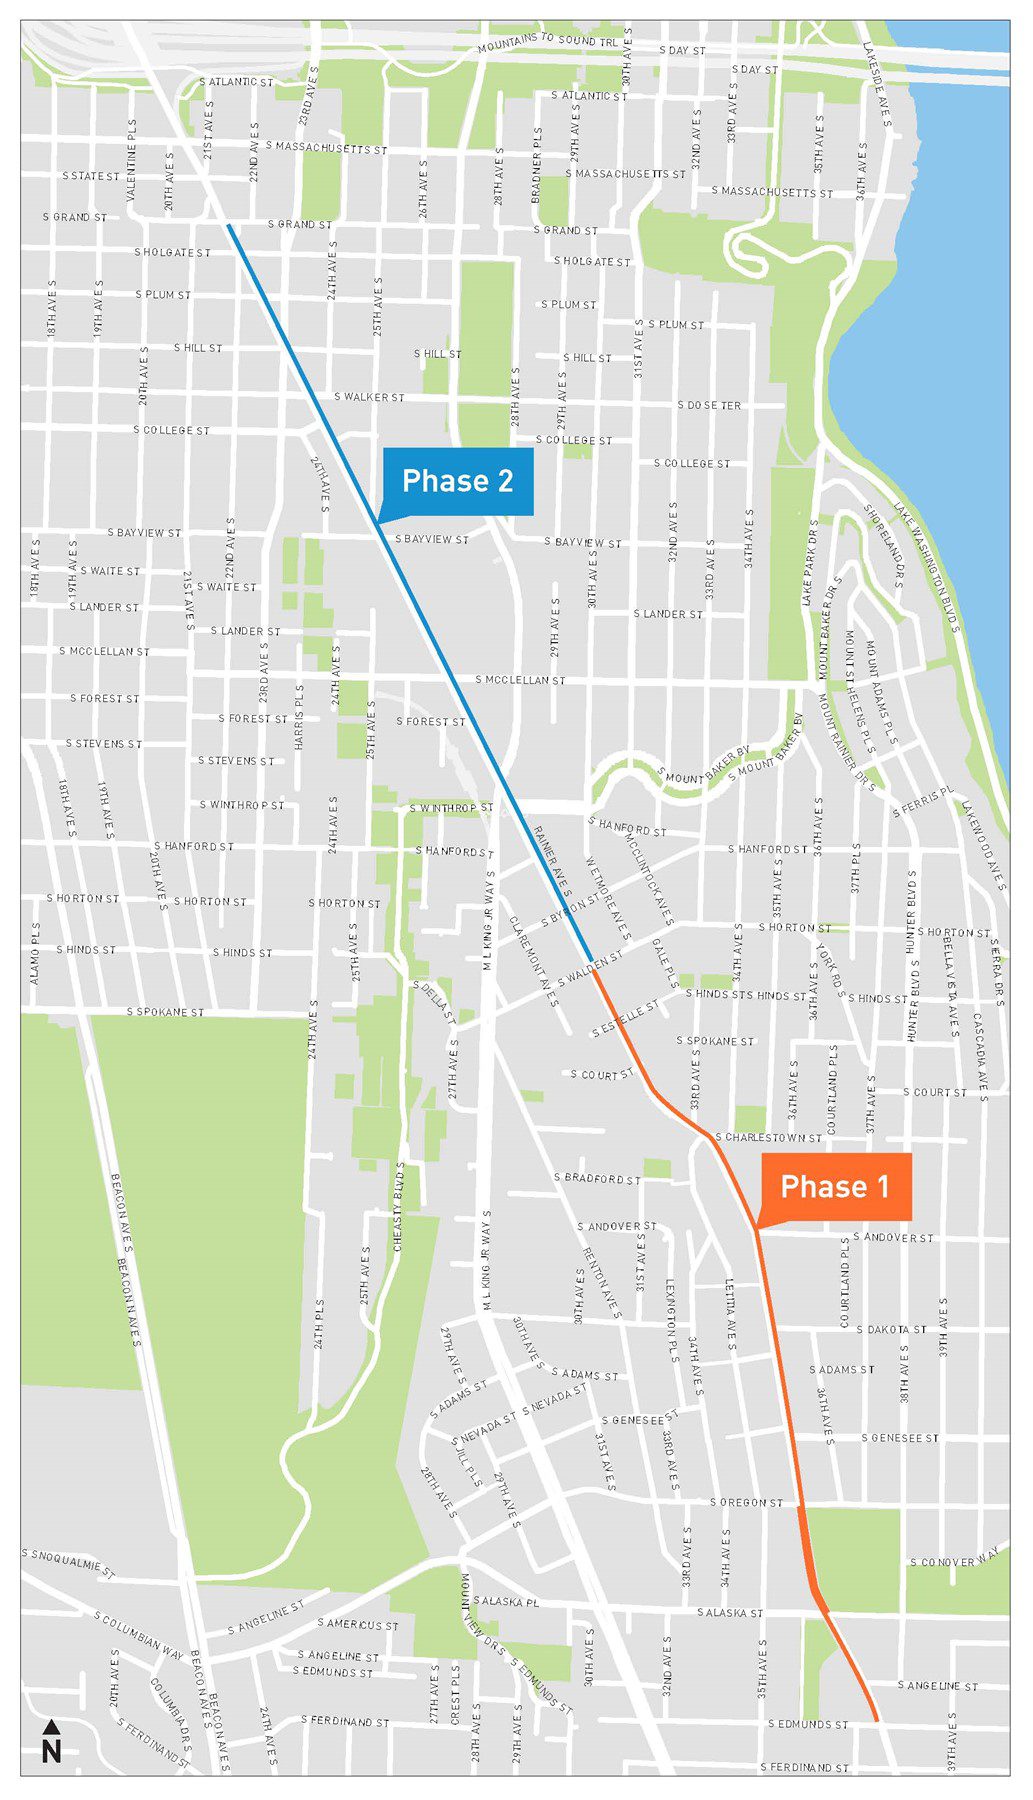 Map of new bus lanes along Rainier Ave S, in two phases. The first phase was installed earlier this summer. The first phase is shown in an orange line, while the second phase is shown in a blue line.